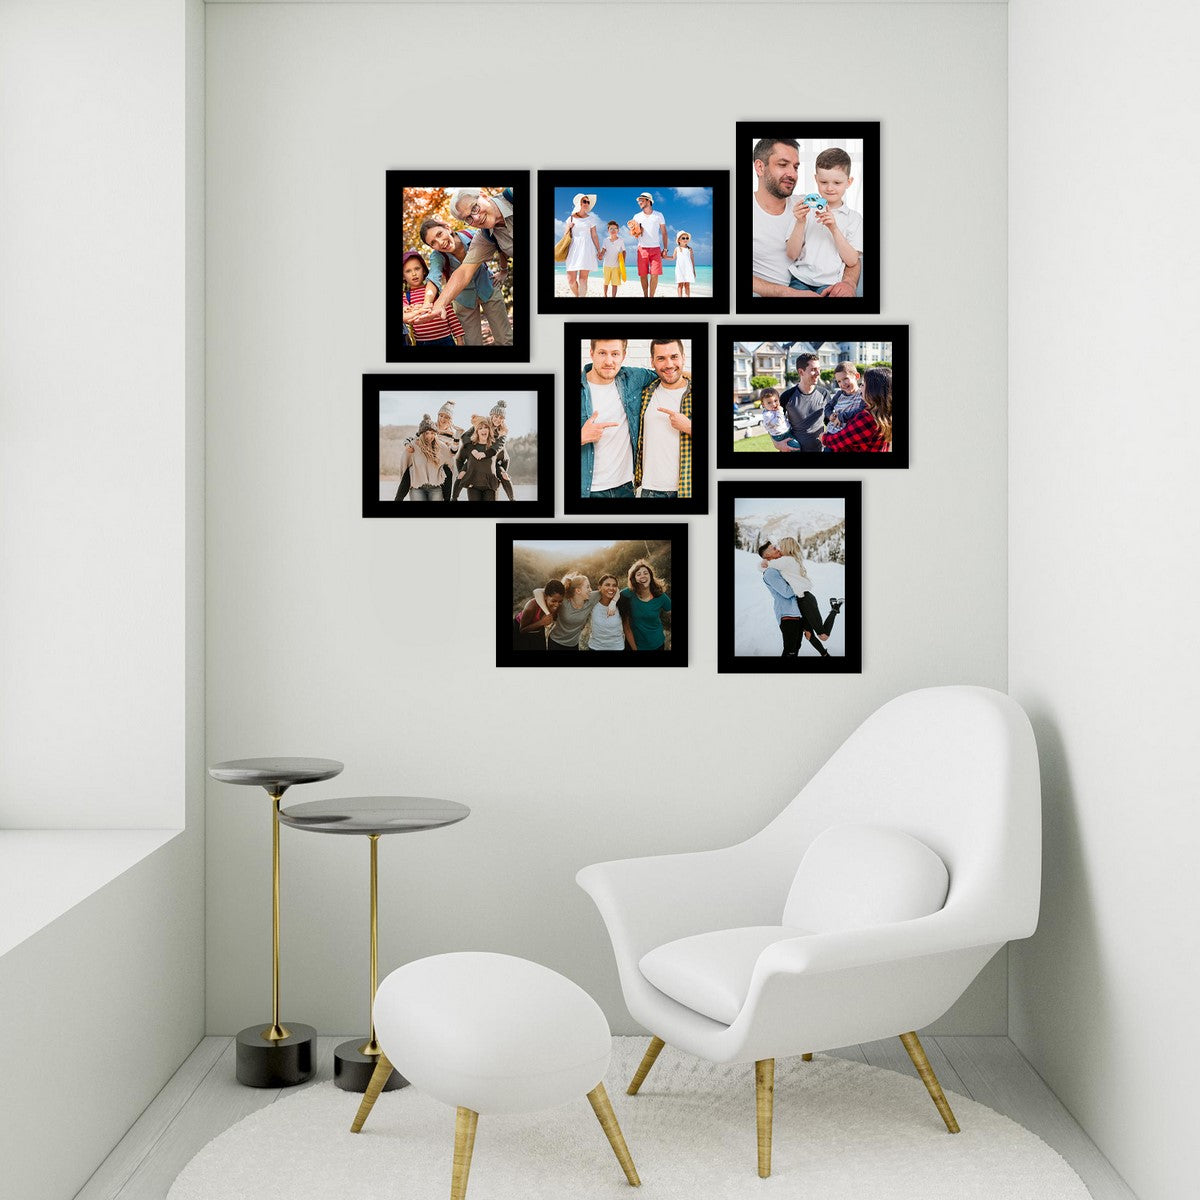 Memory Wall Collage Photo Frame - Set of 8 Photo Frames for 8 Photos of 6"x8" 2